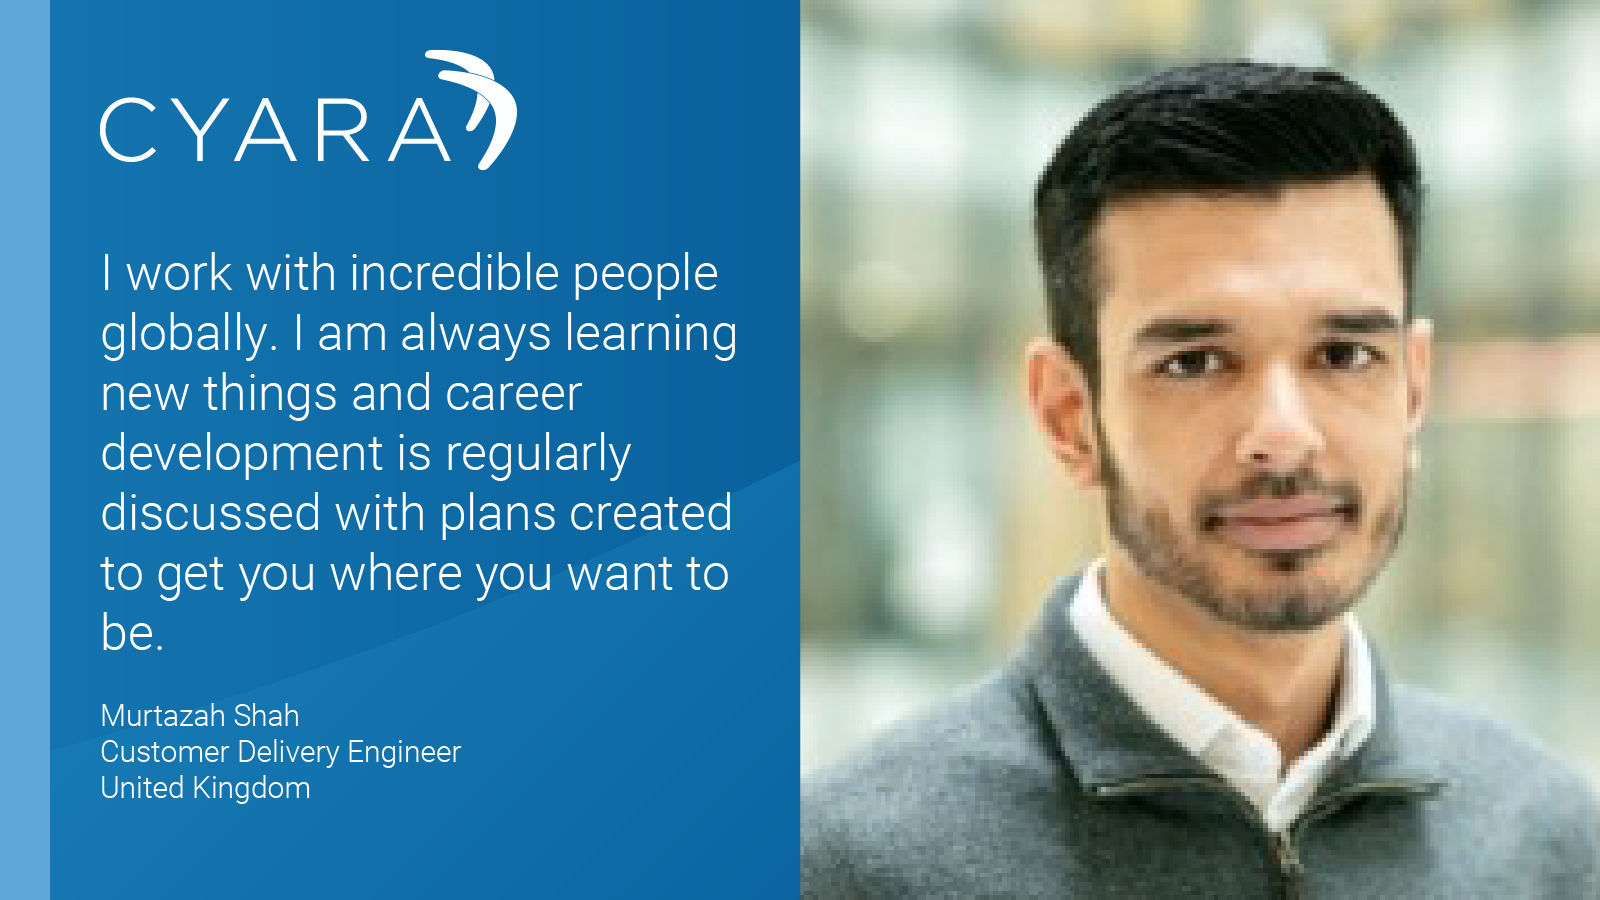 Cyara Employee profile with quote "I work with incredible people globally. I am always learning new things and career development is regularly discussed with plans created to get you where you want to be."